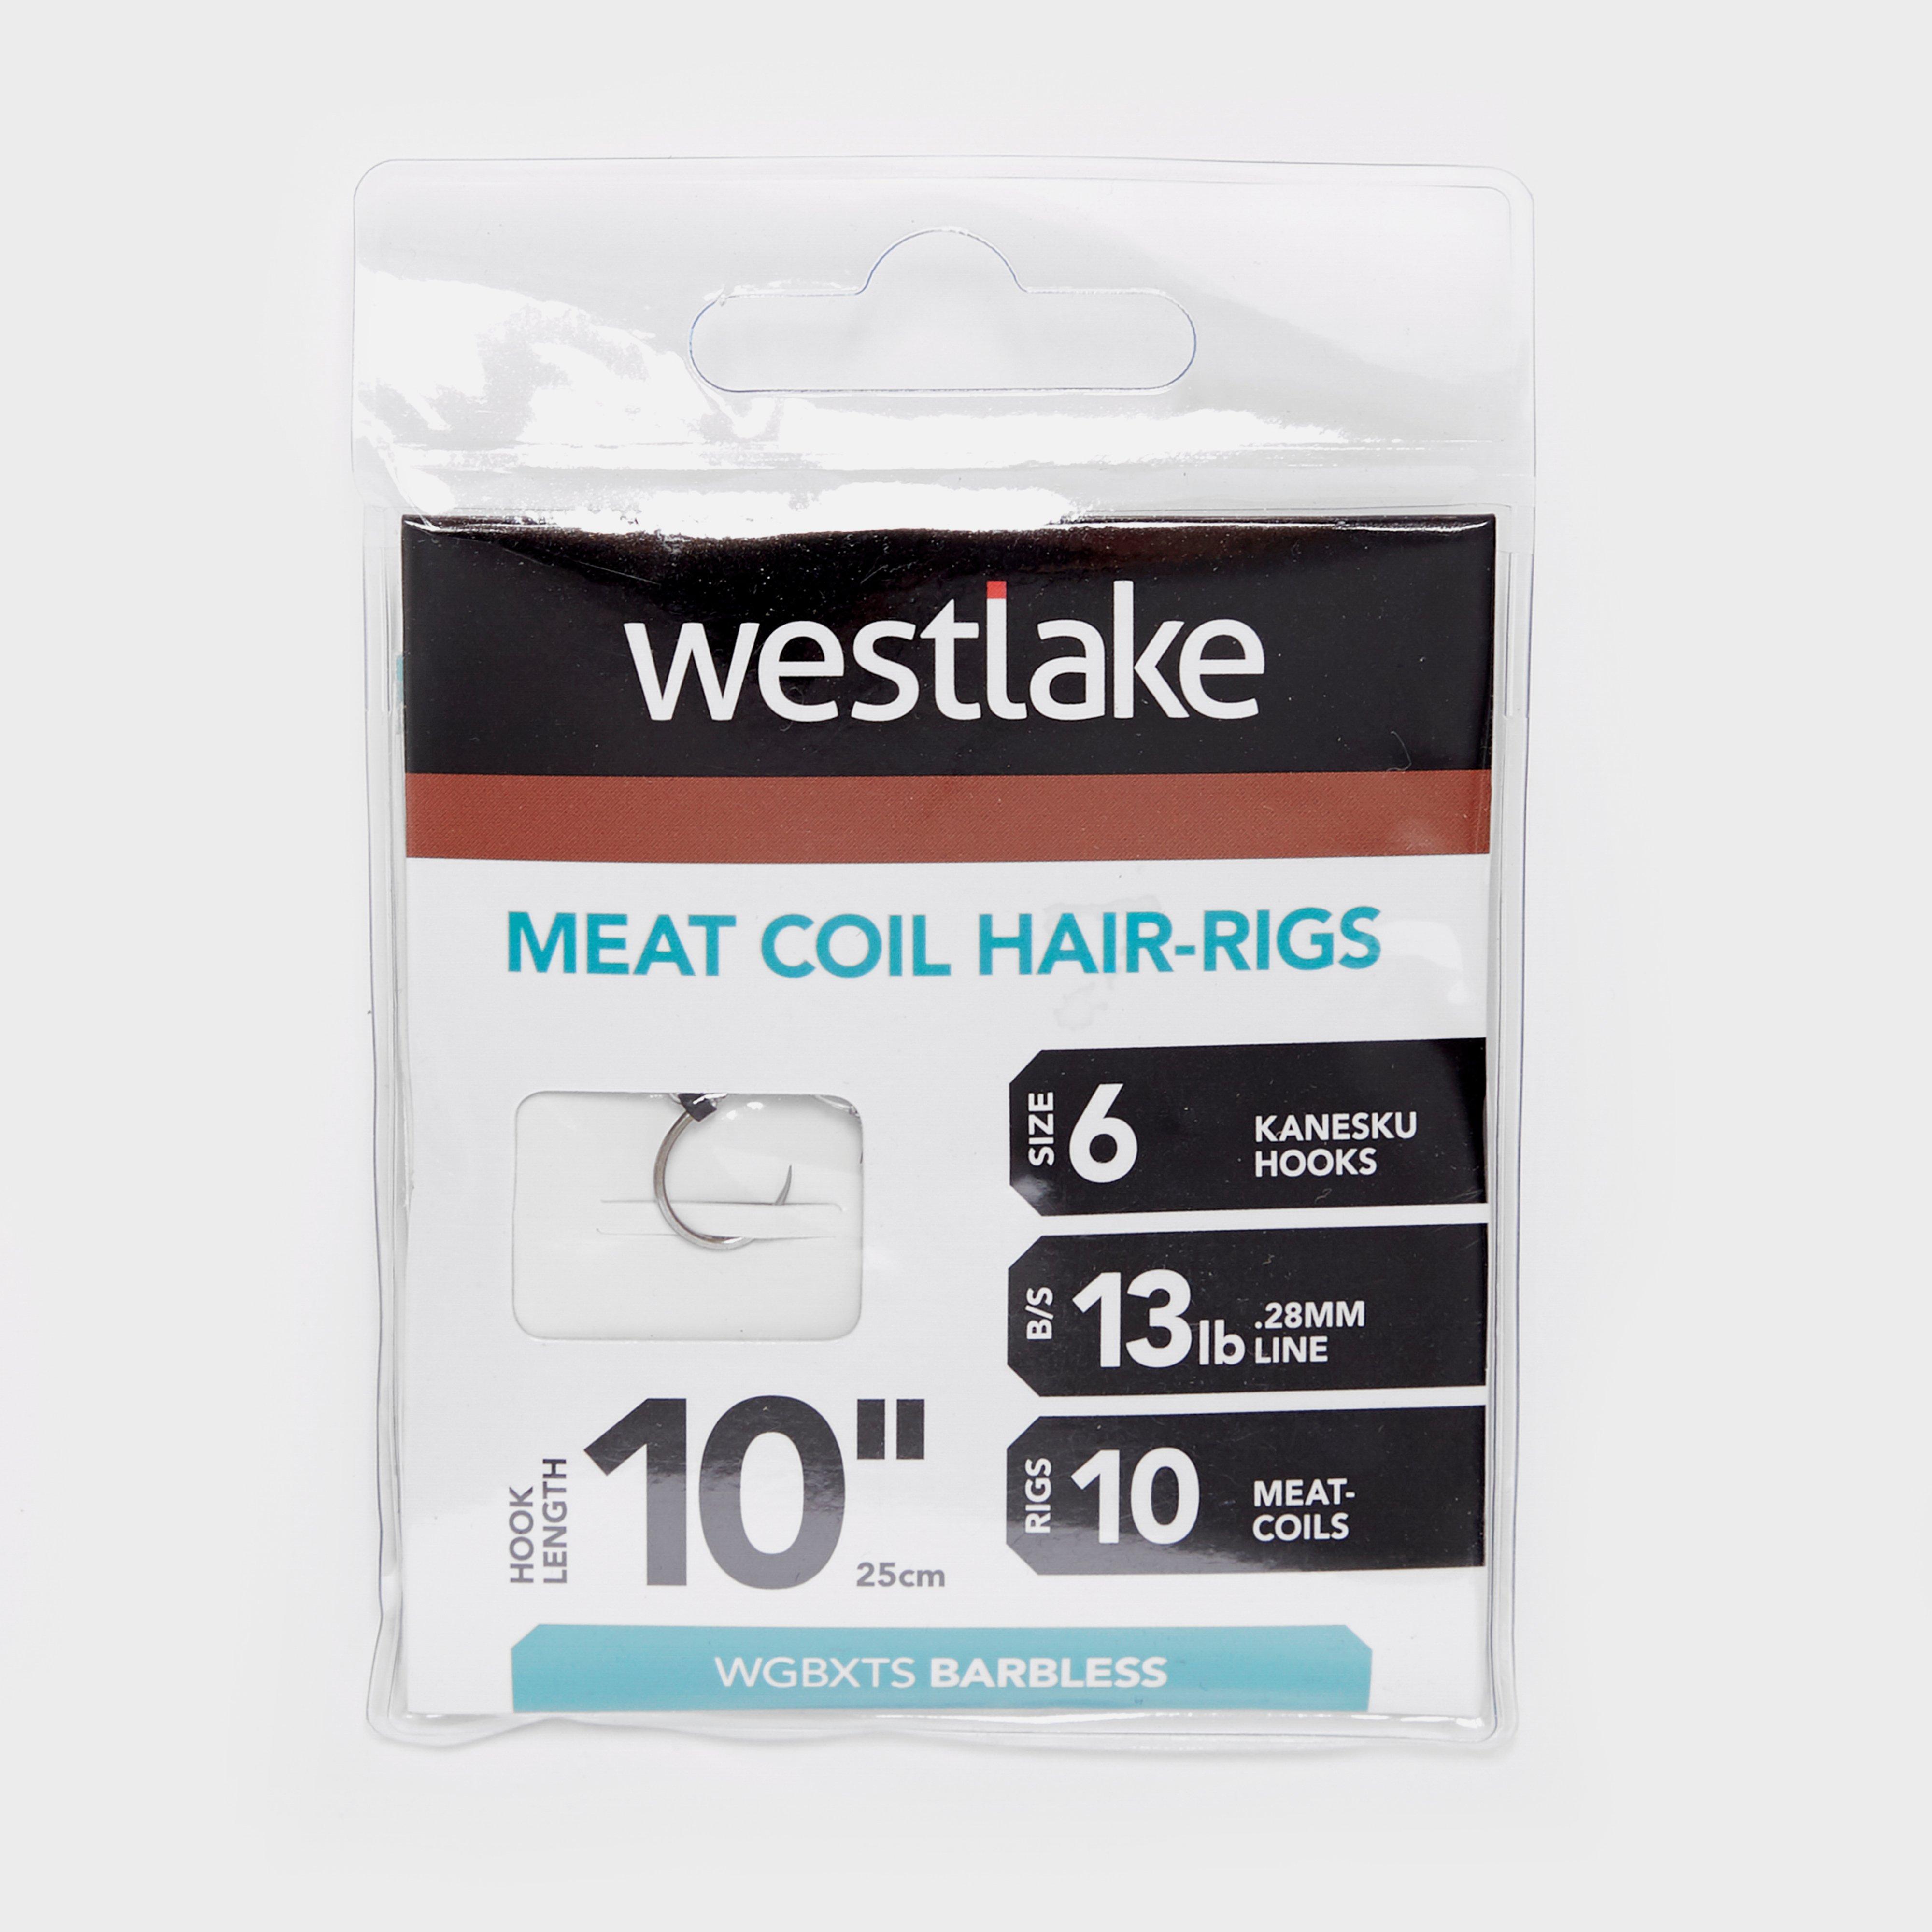 Westlake Meat Coil Hair-rigs (size 6)  Silver